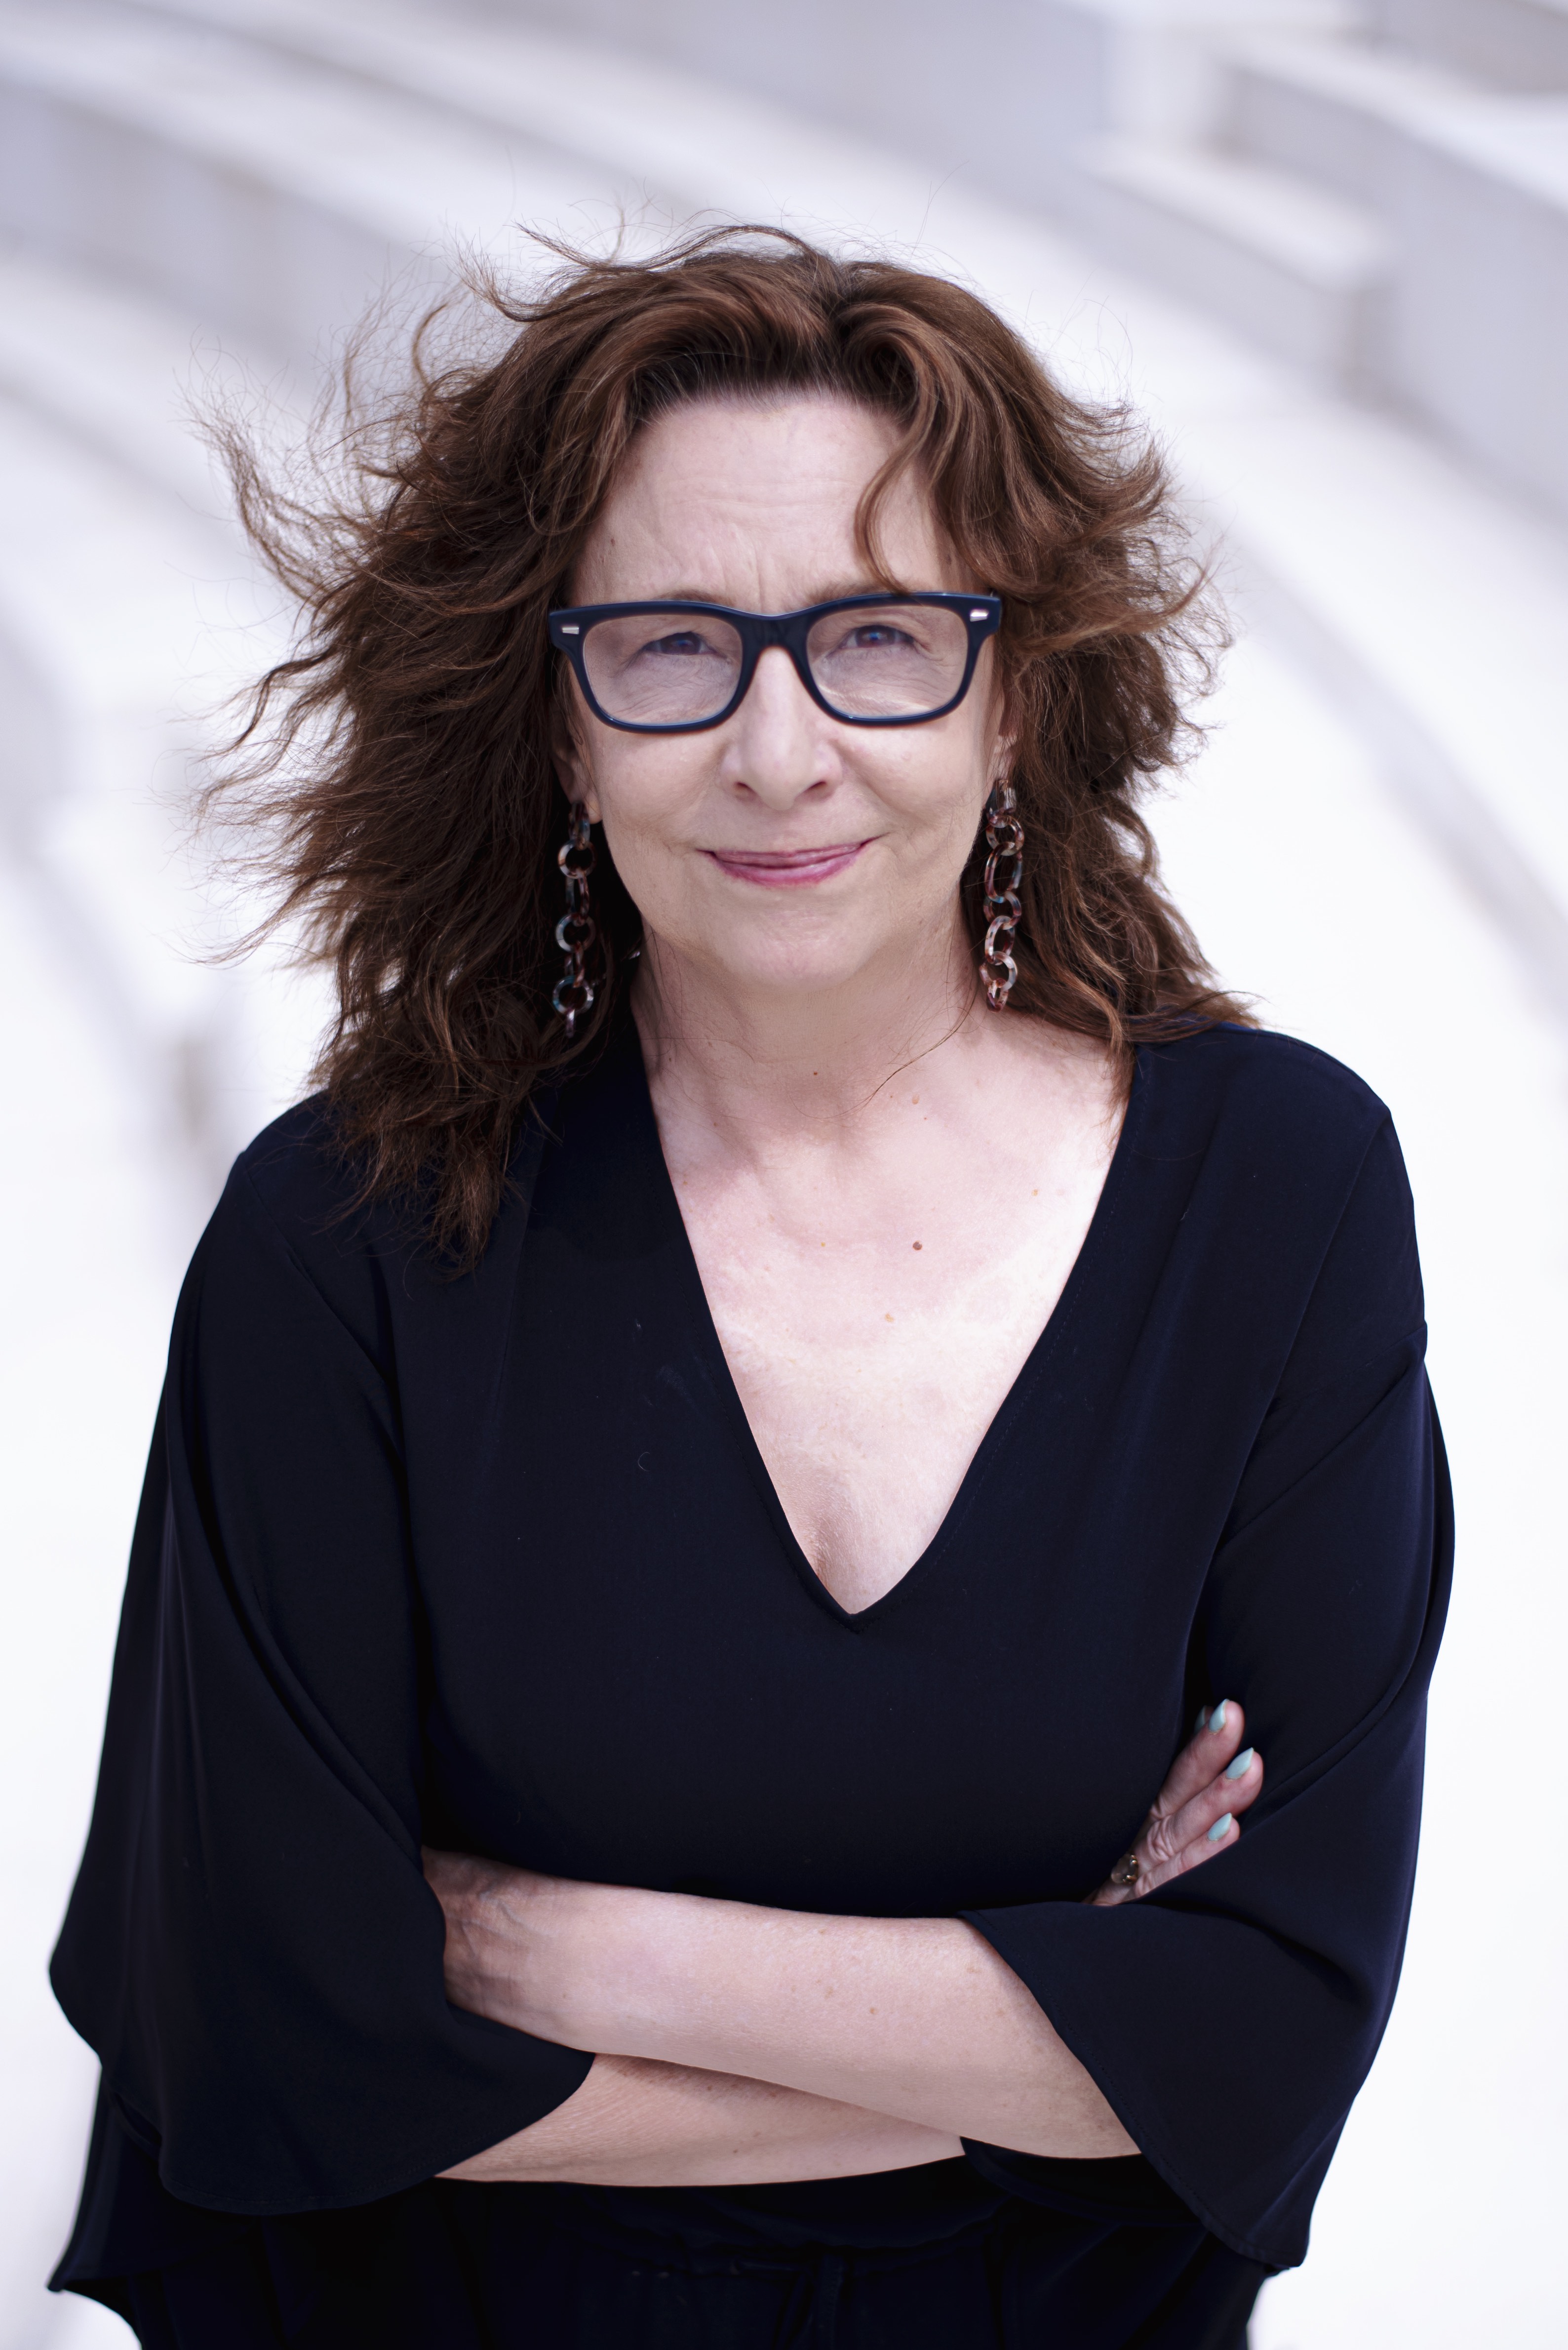 Portrait of Professor Sara J. Hook. She is a white woman with reddish-brown hair. She is wearing a black, v-neck sweater, dark framed glasses, and dangling statement earrings. Her arms are crossed in front of her body and she looks at the camera and gives a small smile. Photo by Elliot Emadian. 